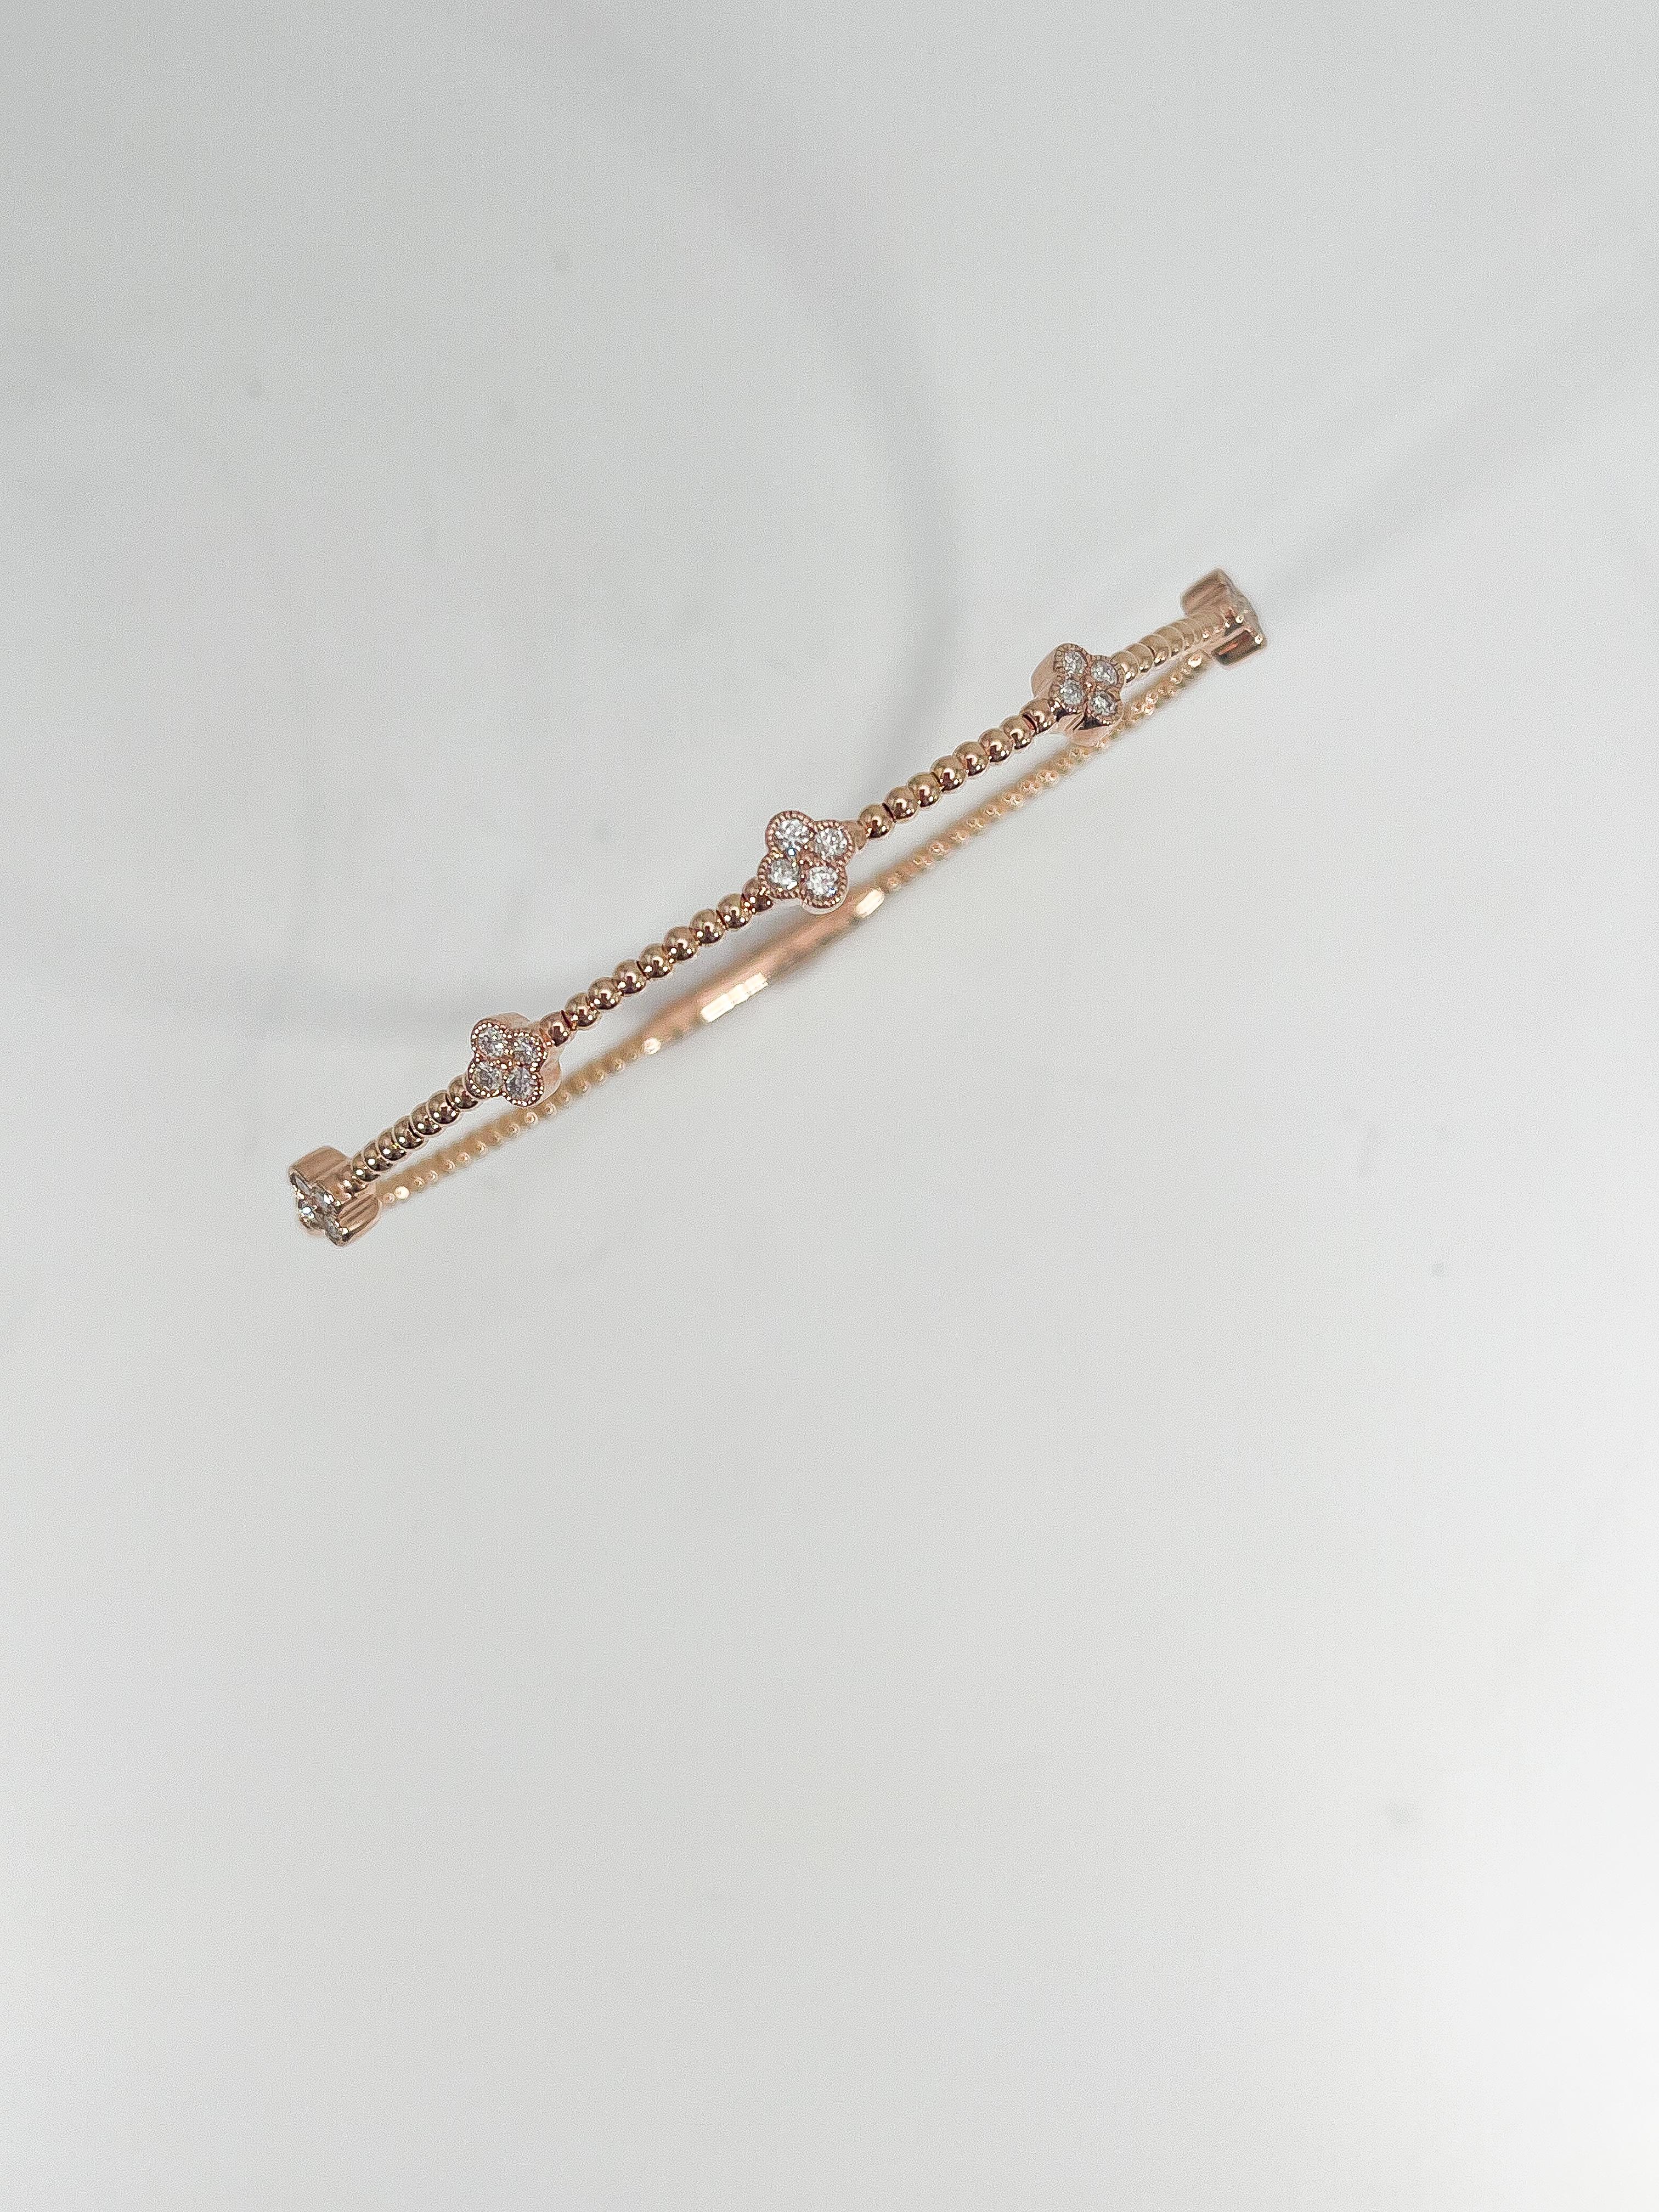 14k rose gold .32 CTW diamond cluster flex bangle. The diamonds in this bracelet are all round, the width is 5 mm, the inside diameter is about 4 inches, and it has a total weight of 5.32 grams.